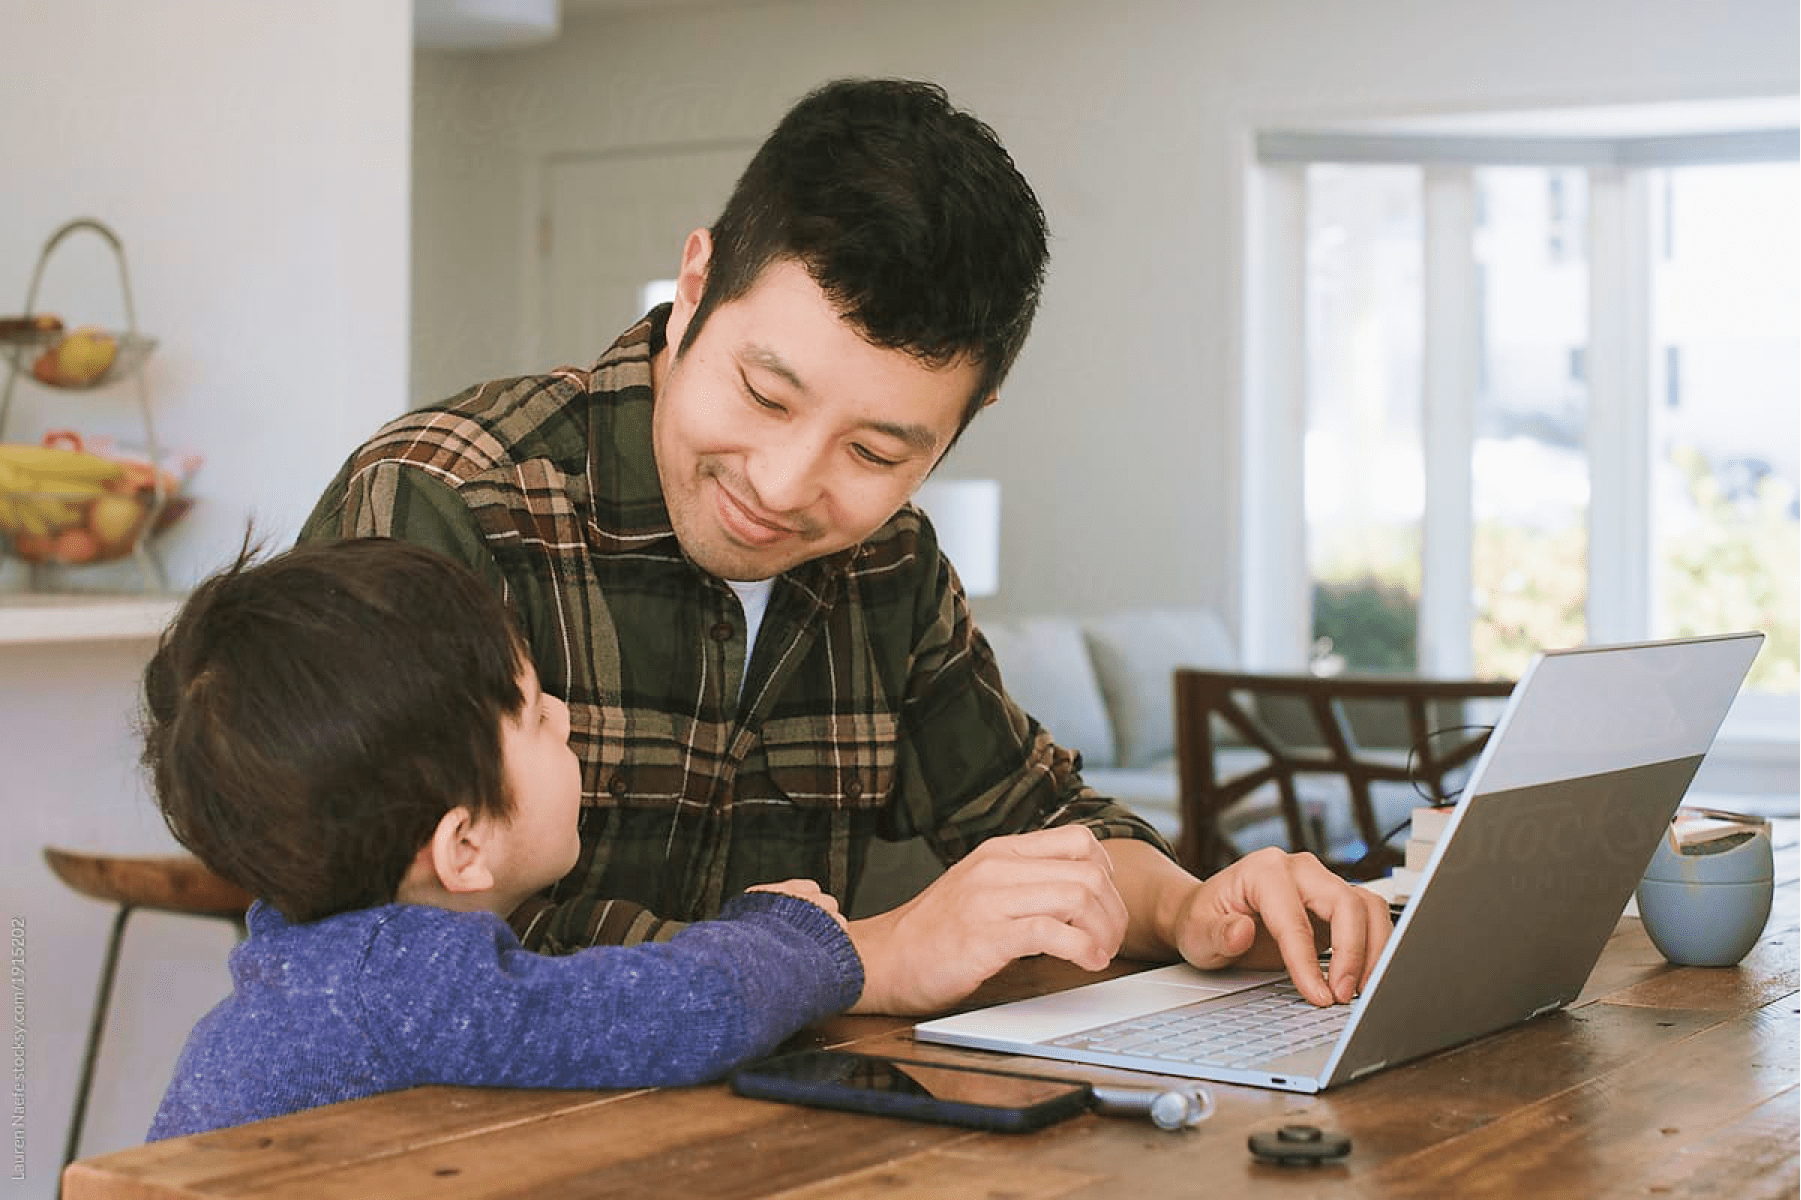 A father sitting in front of his laptop and smiling at his son.